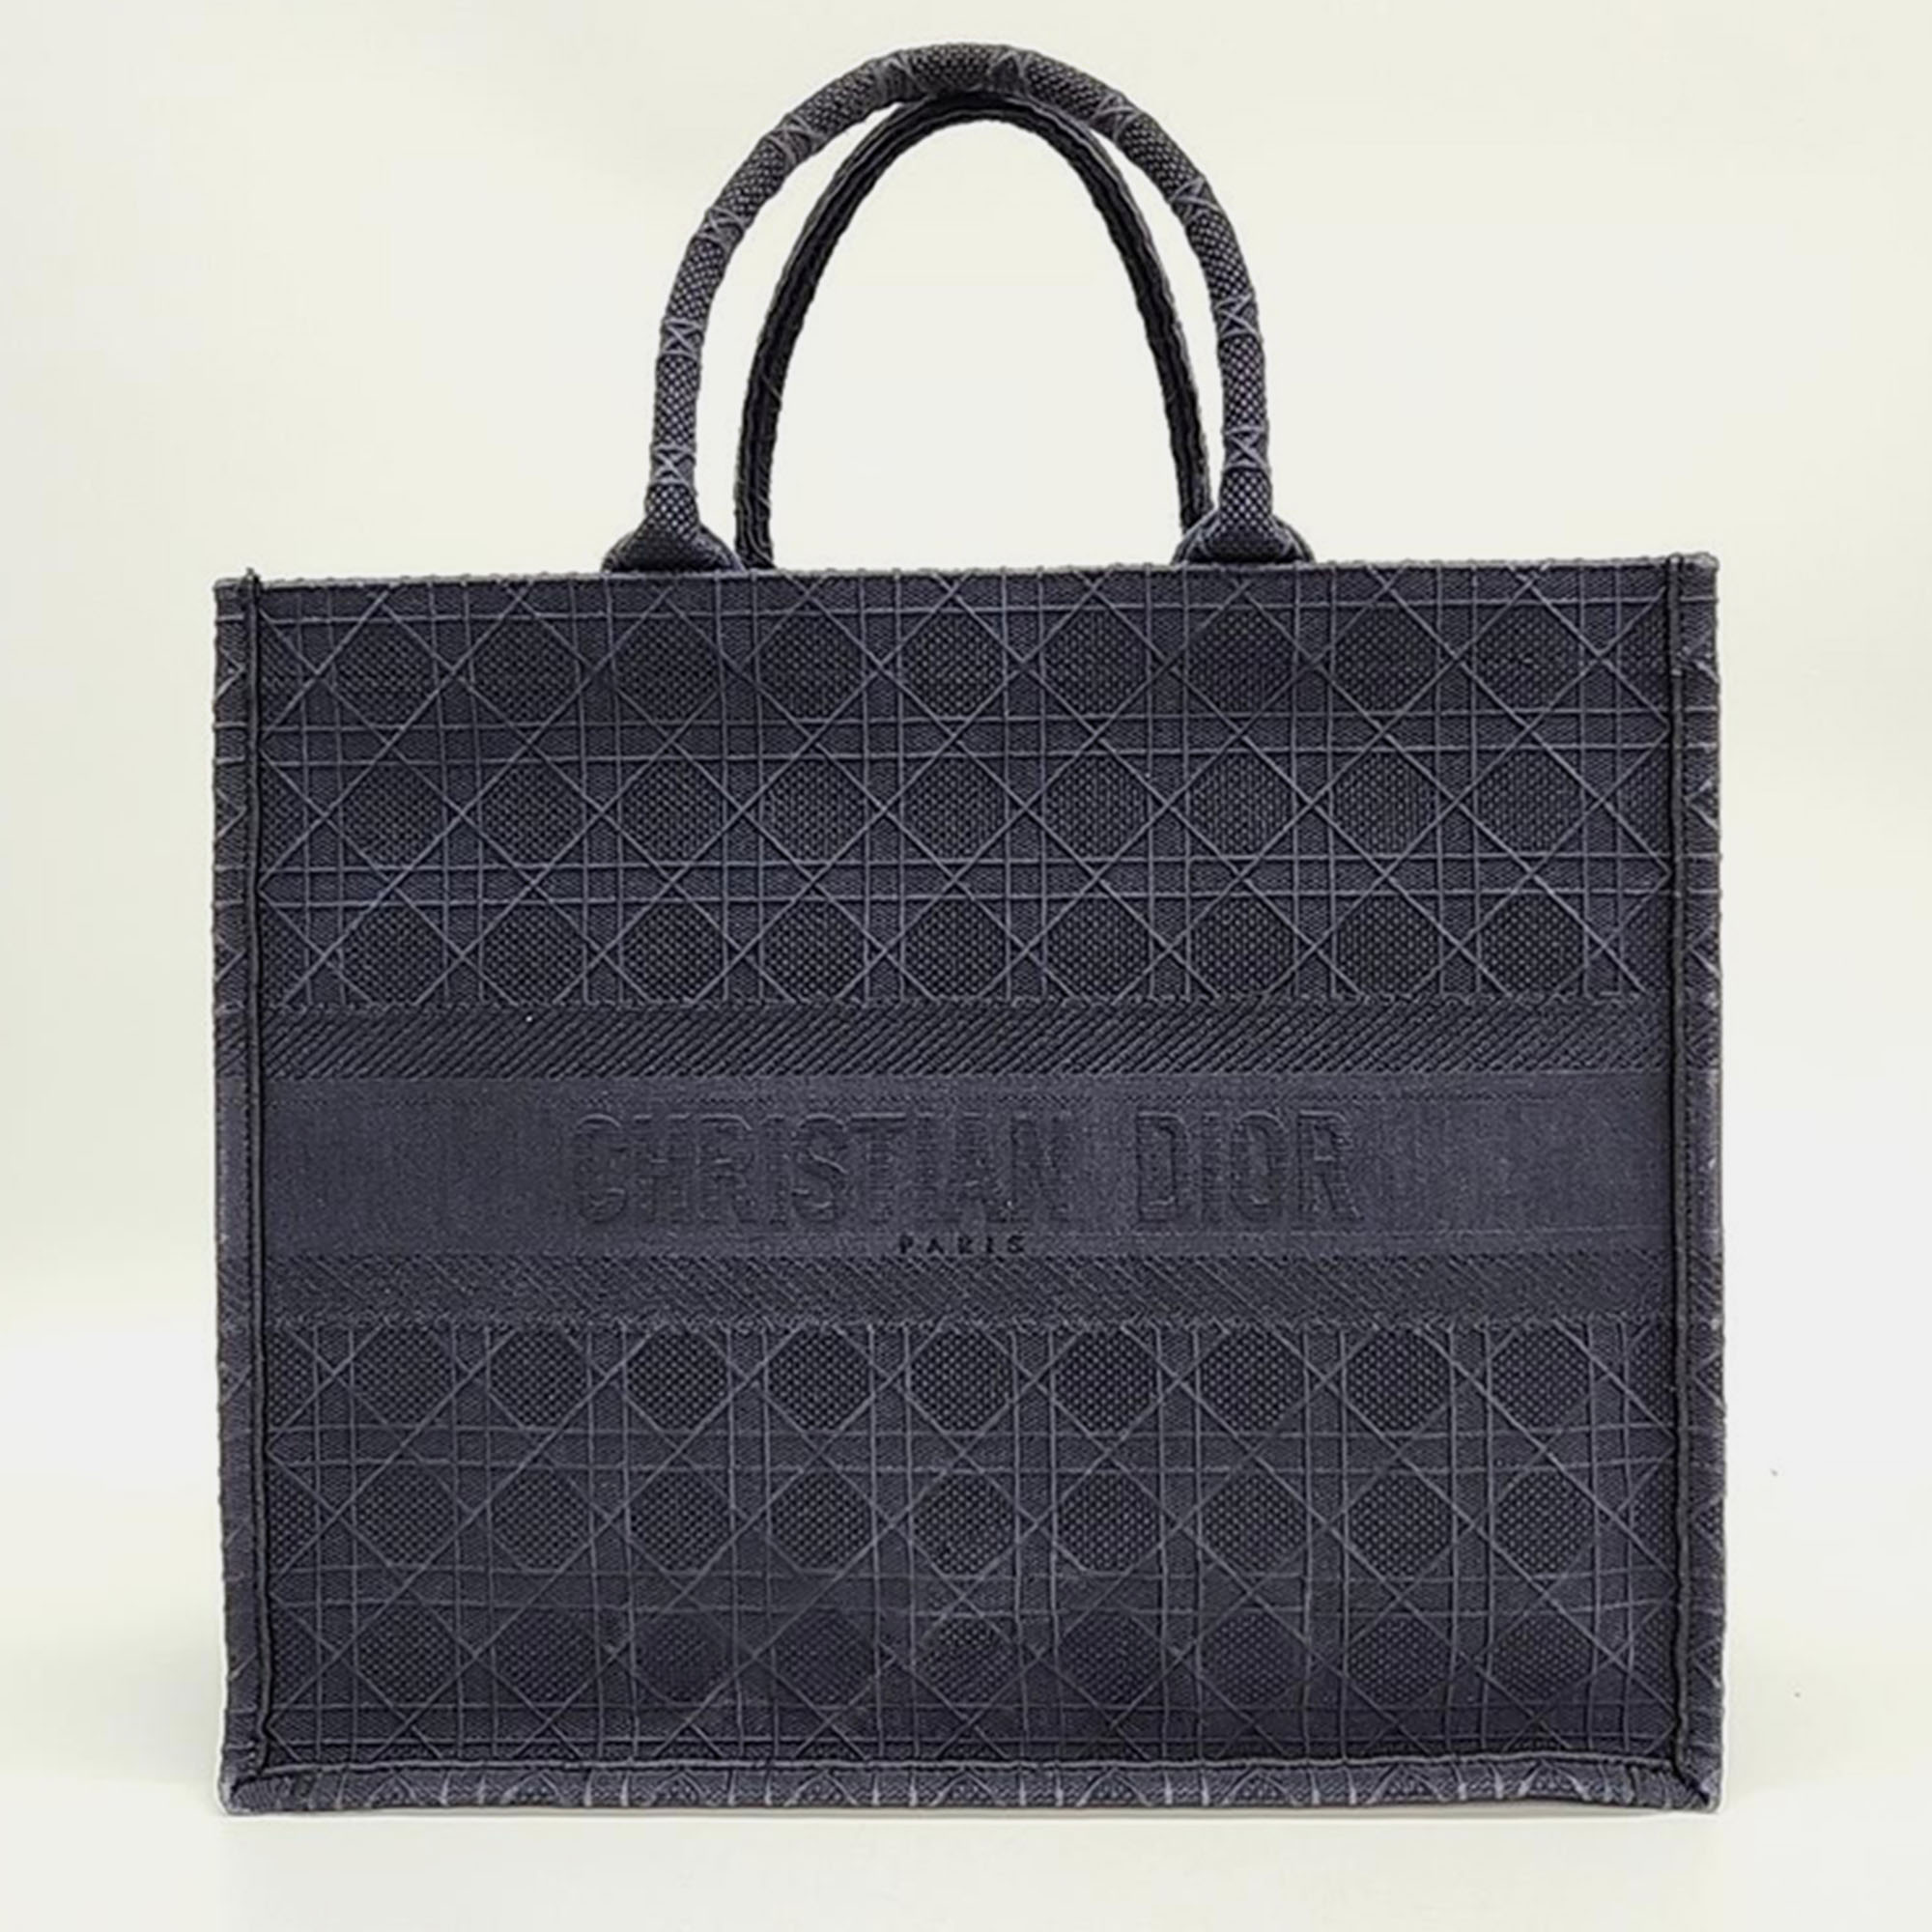 Christian dior black canvas large cannage book tote